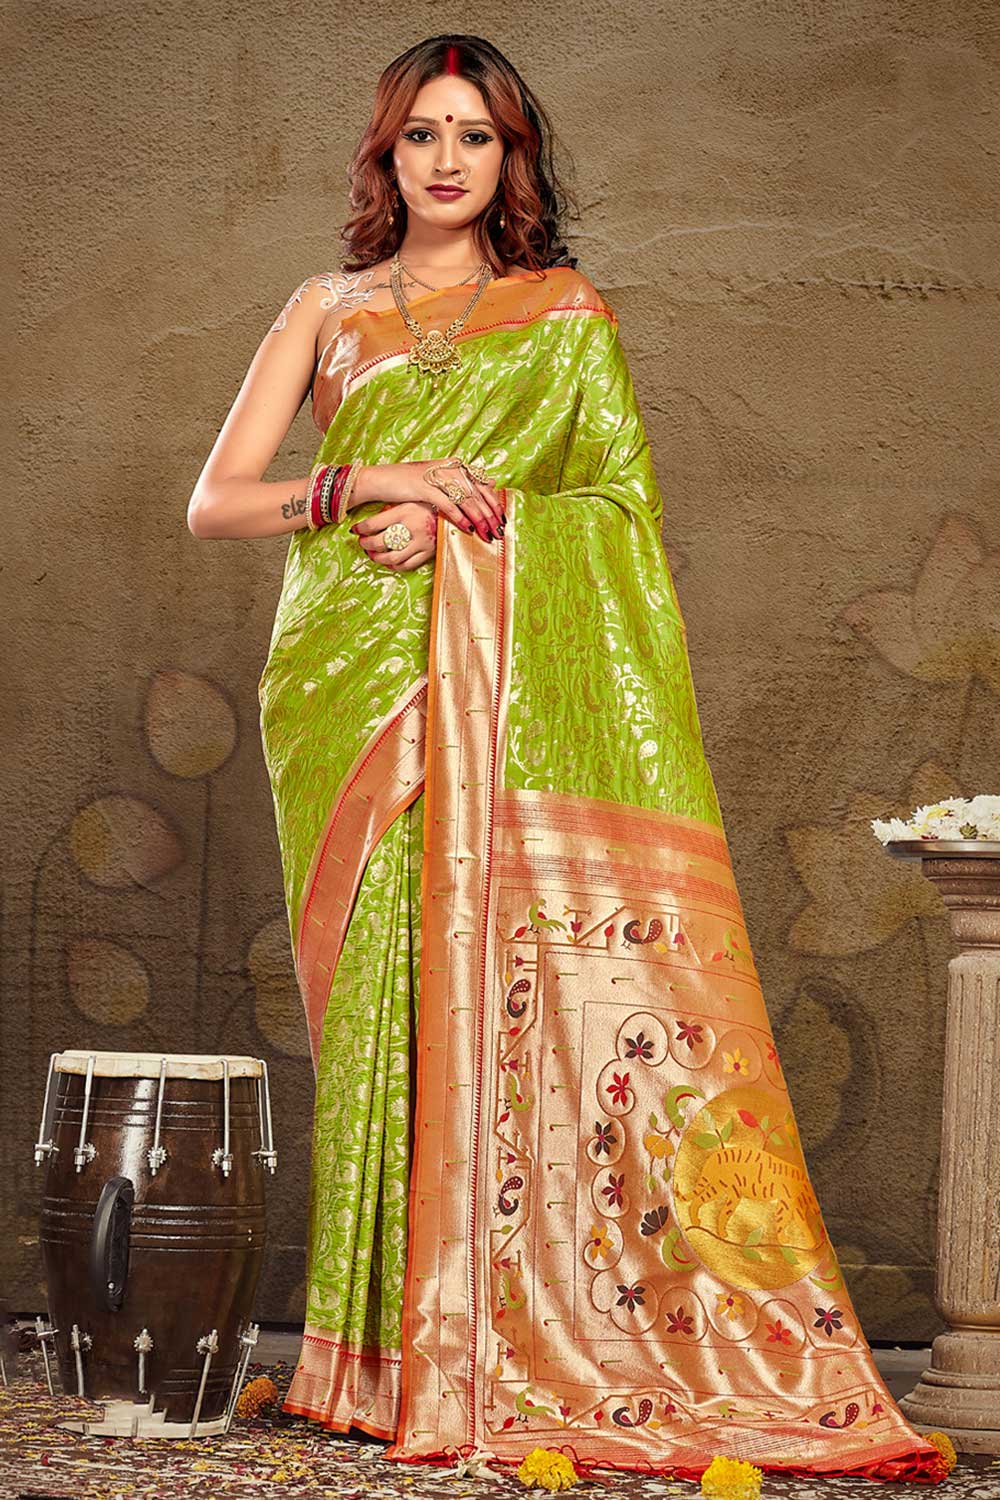 Shop Deepti Green Paithani Art Silk One Minute Saree at best offer at our  Store - One Minute Saree